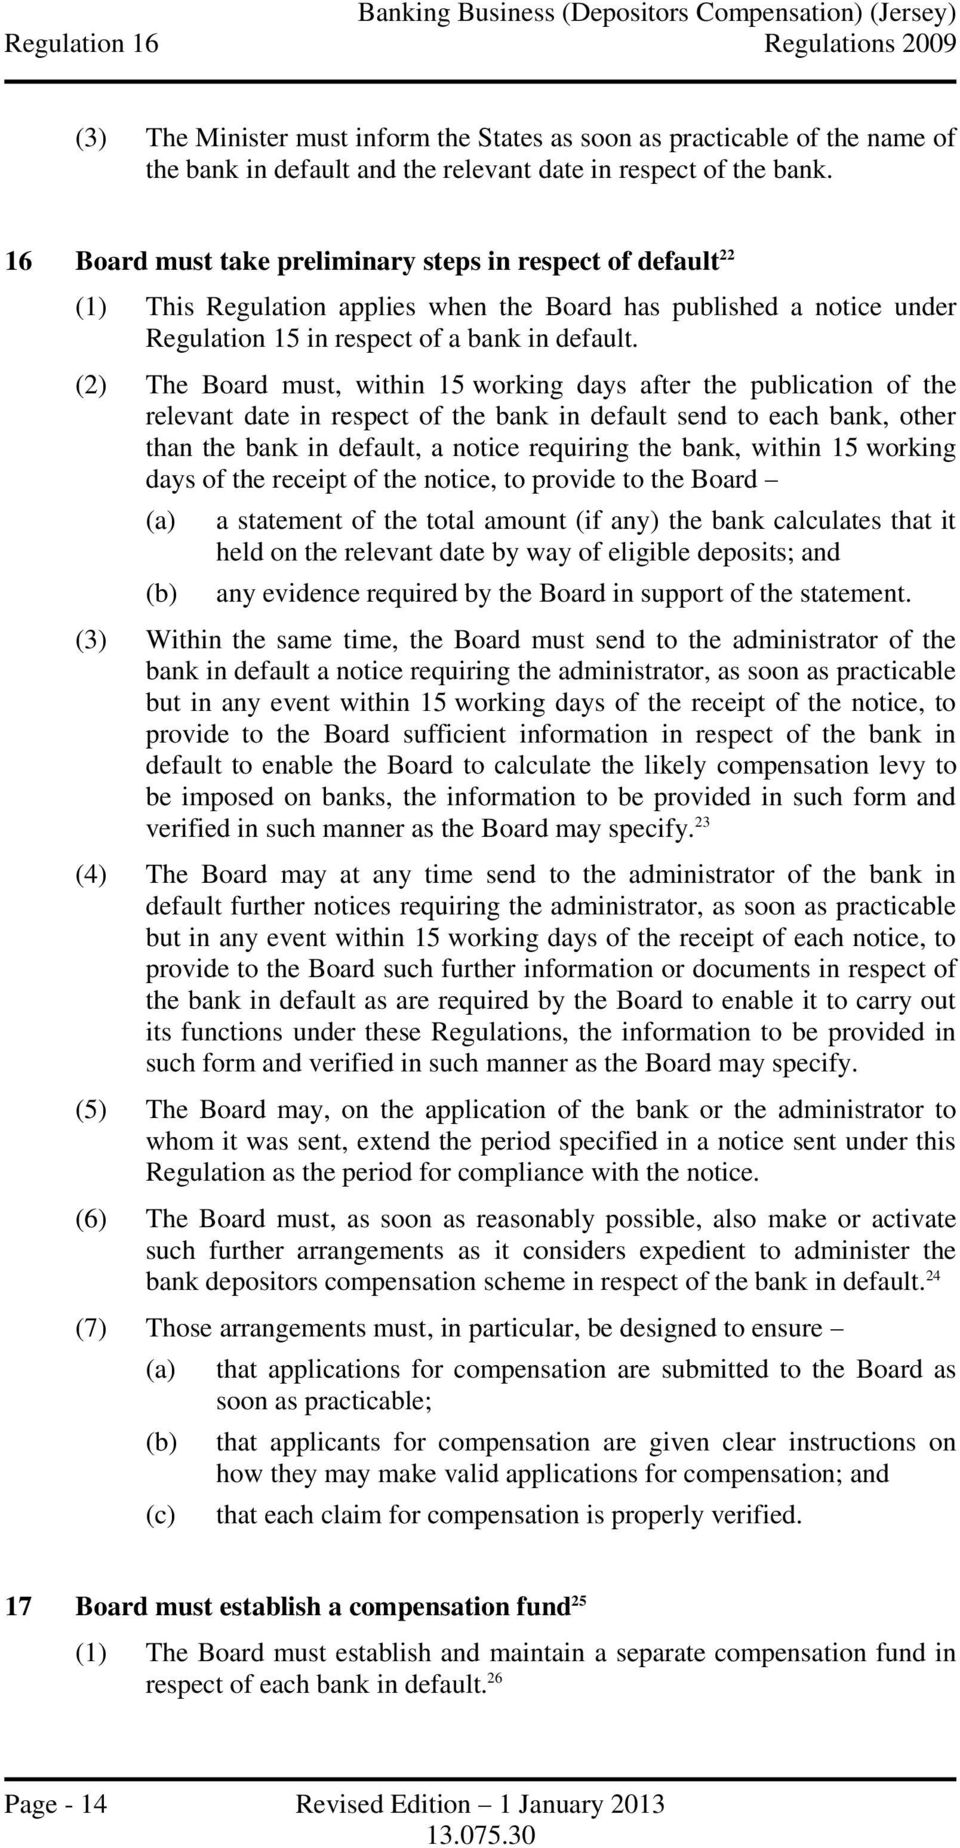 (2) The Board must, within 15 working days after the publication of the relevant date in respect of the bank in default send to each bank, other than the bank in default, a notice requiring the bank,